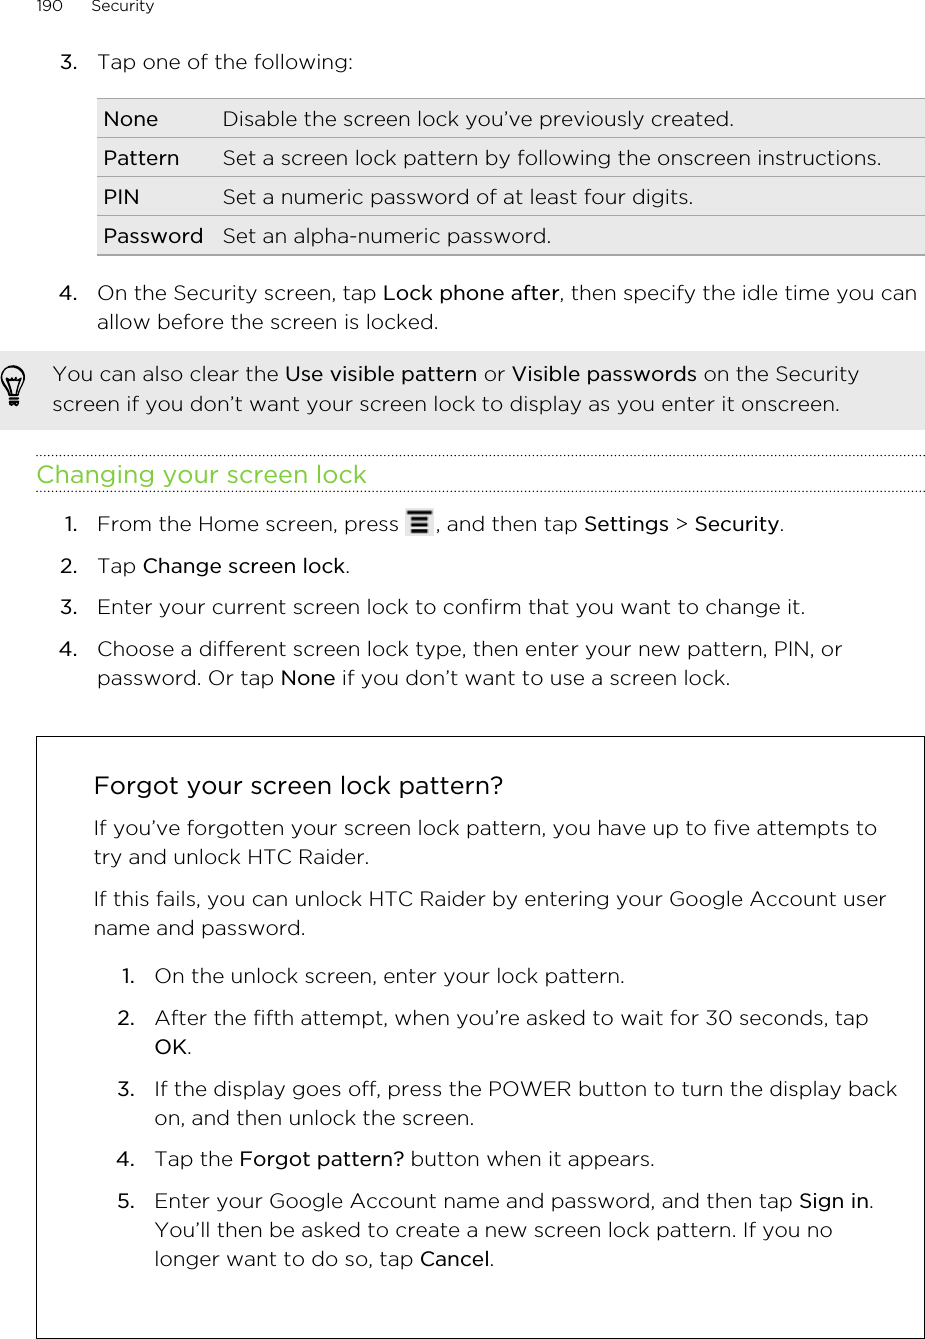 3. Tap one of the following:None Disable the screen lock you’ve previously created.Pattern Set a screen lock pattern by following the onscreen instructions.PIN Set a numeric password of at least four digits.Password Set an alpha-numeric password.4. On the Security screen, tap Lock phone after, then specify the idle time you canallow before the screen is locked. You can also clear the Use visible pattern or Visible passwords on the Securityscreen if you don’t want your screen lock to display as you enter it onscreen.Changing your screen lock1. From the Home screen, press  , and then tap Settings &gt; Security.2. Tap Change screen lock.3. Enter your current screen lock to confirm that you want to change it.4. Choose a different screen lock type, then enter your new pattern, PIN, orpassword. Or tap None if you don’t want to use a screen lock.Forgot your screen lock pattern?If you’ve forgotten your screen lock pattern, you have up to five attempts totry and unlock HTC Raider.If this fails, you can unlock HTC Raider by entering your Google Account username and password.1. On the unlock screen, enter your lock pattern.2. After the fifth attempt, when you’re asked to wait for 30 seconds, tapOK.3. If the display goes off, press the POWER button to turn the display backon, and then unlock the screen.4. Tap the Forgot pattern? button when it appears.5. Enter your Google Account name and password, and then tap Sign in.You’ll then be asked to create a new screen lock pattern. If you nolonger want to do so, tap Cancel.190 Security